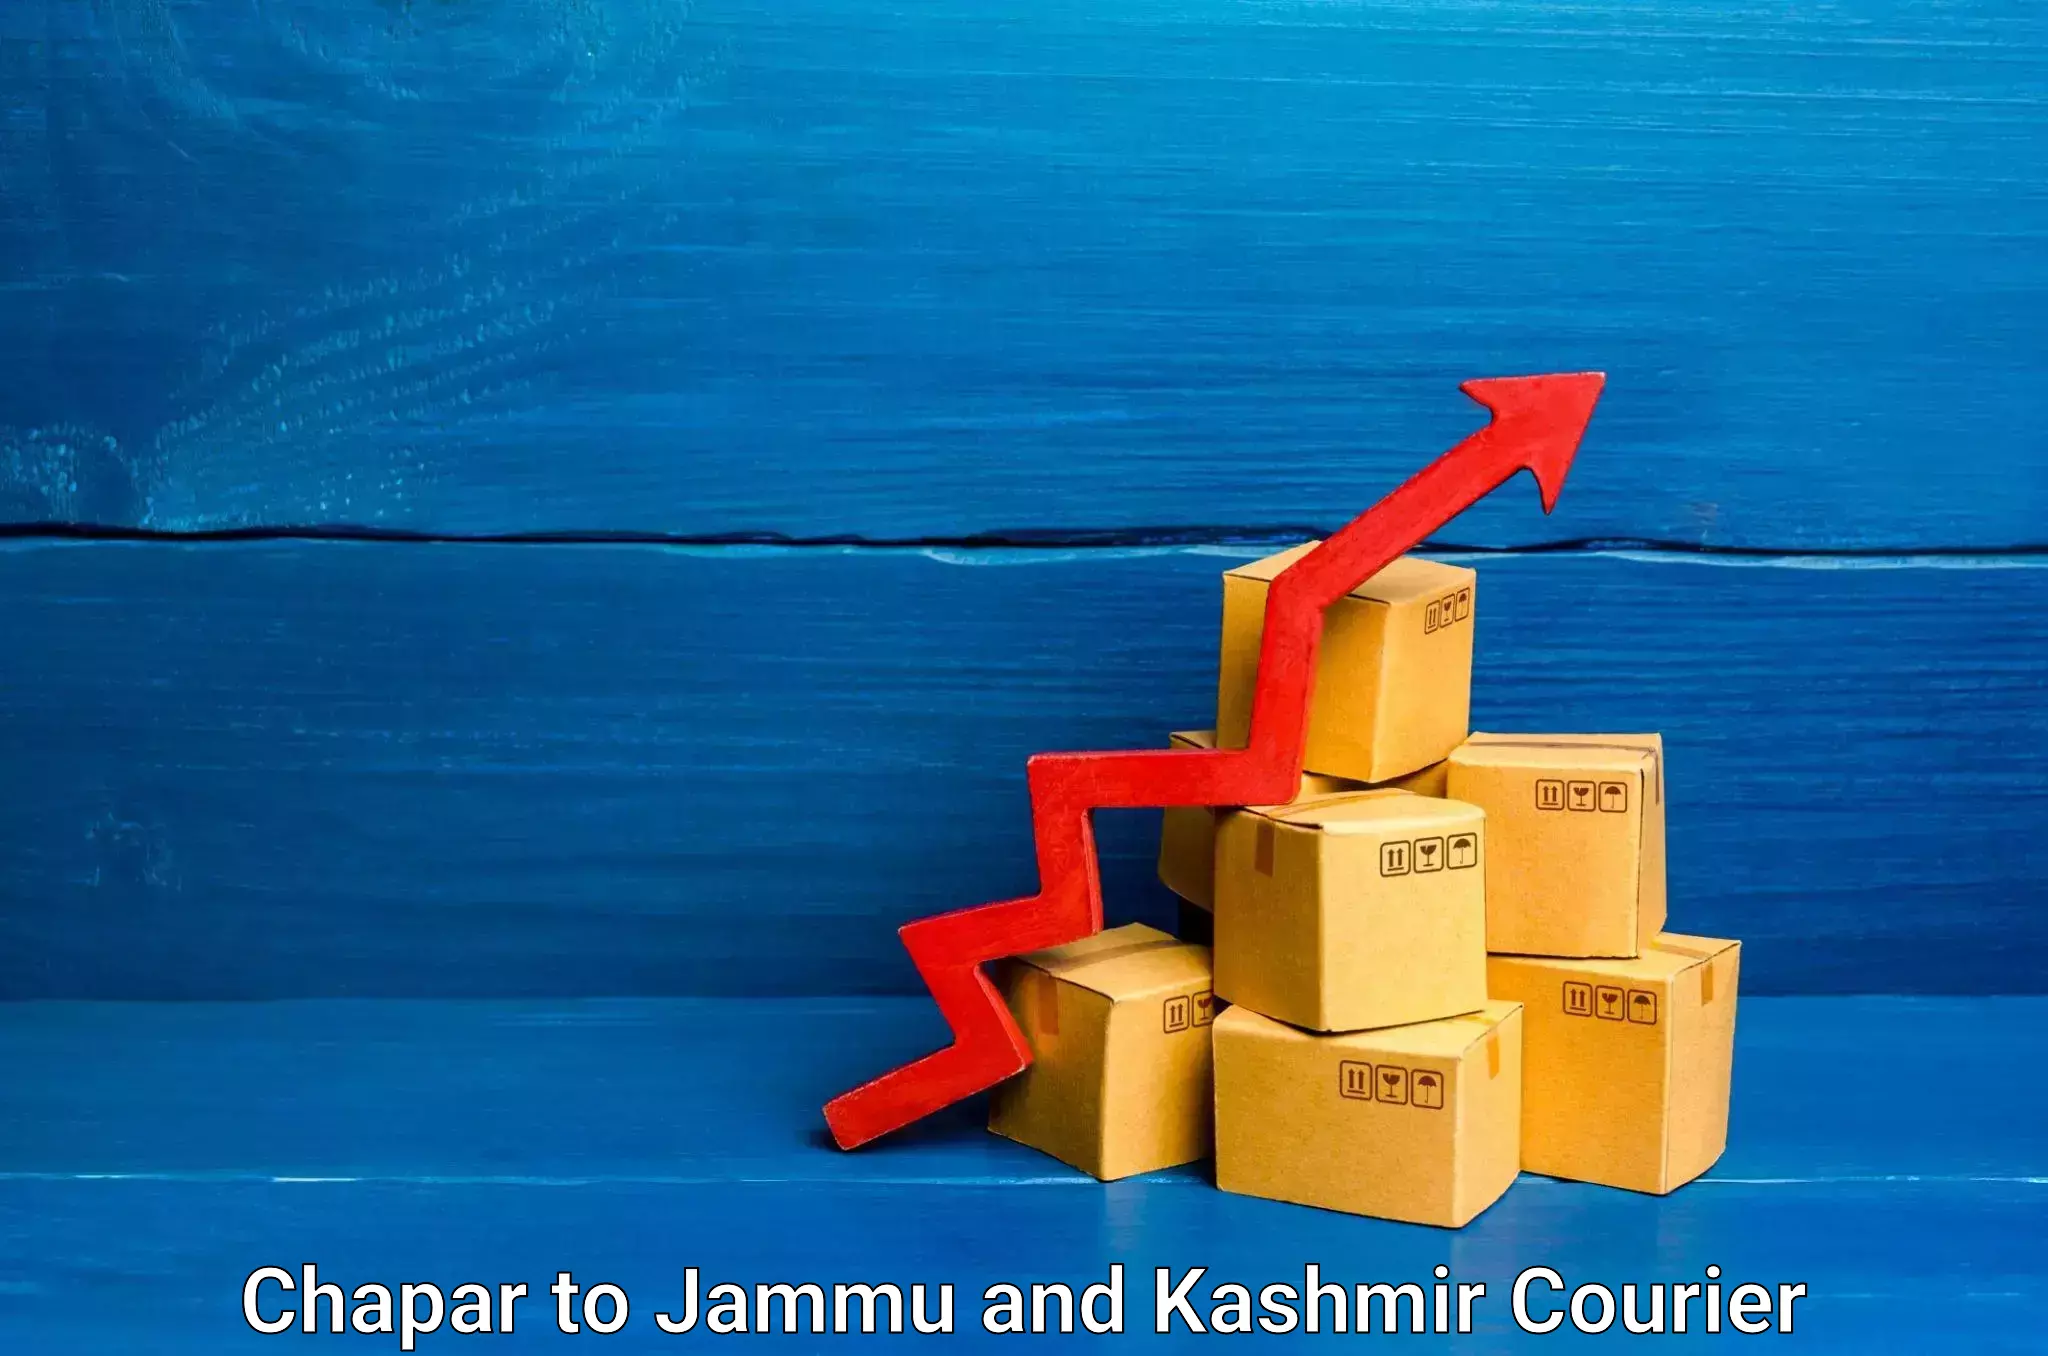 Customizable shipping options in Chapar to Jammu and Kashmir